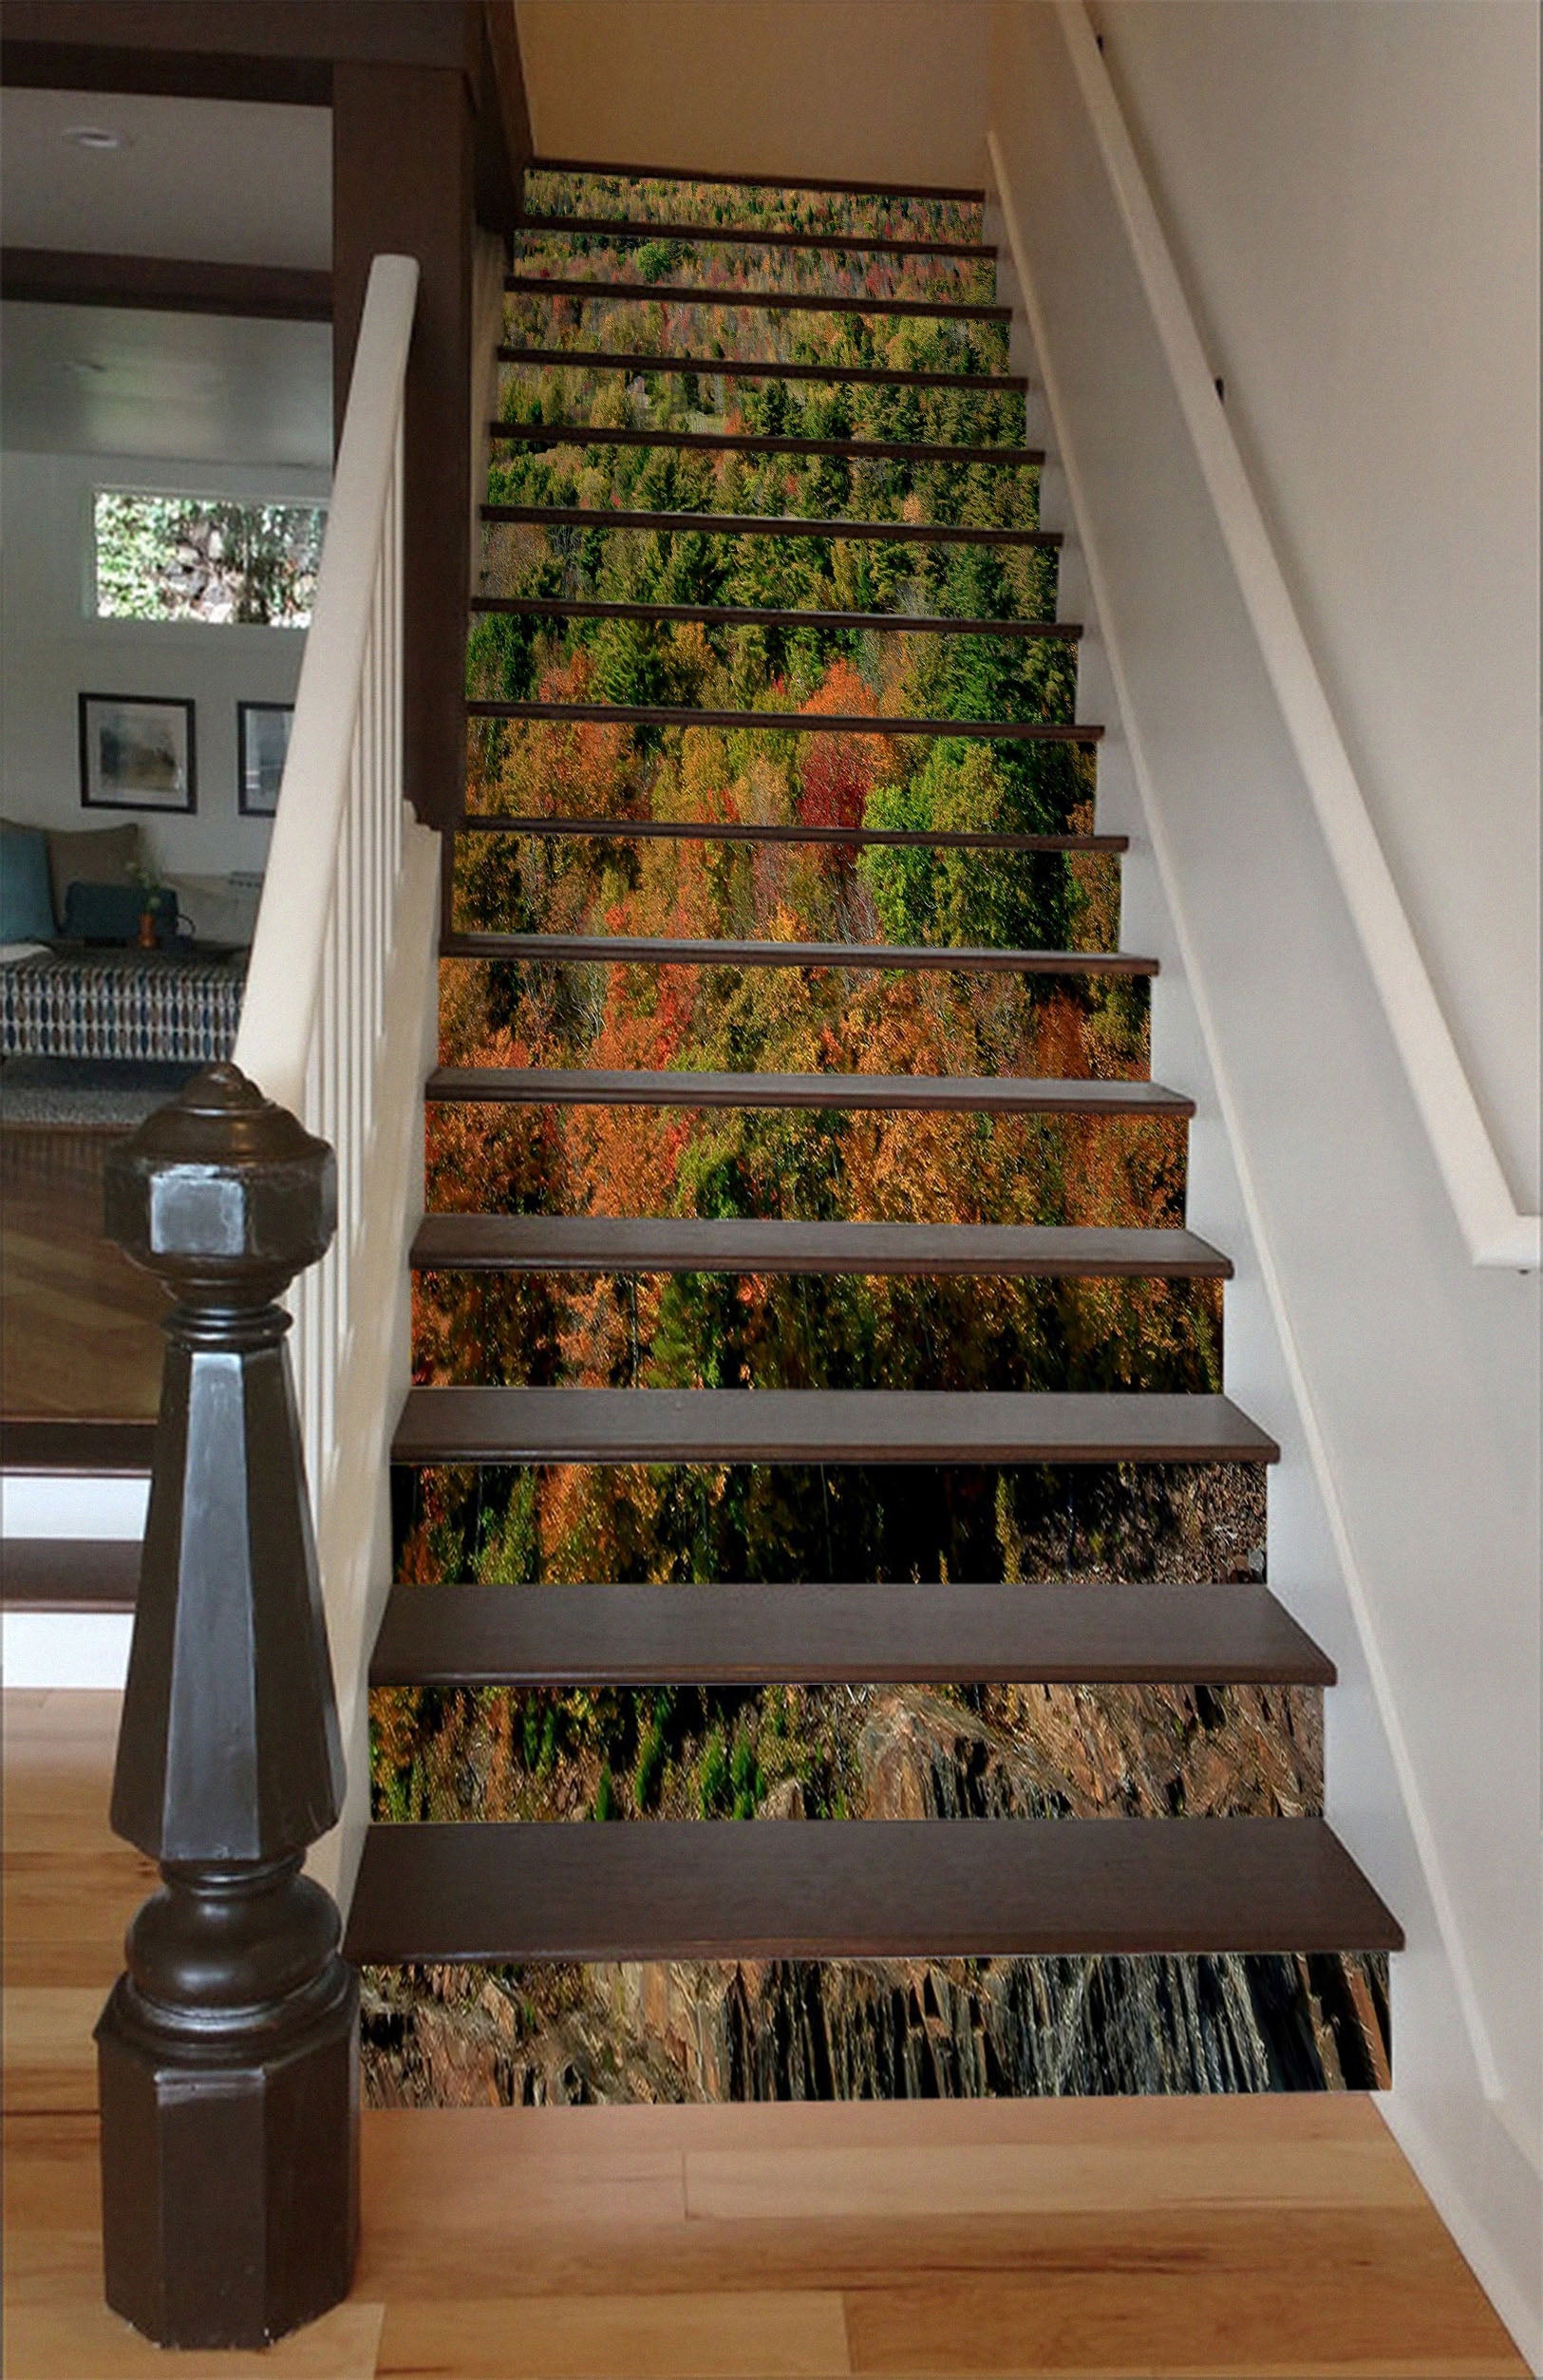 3D Forest 94110 Kathy Barefield Stair Risers